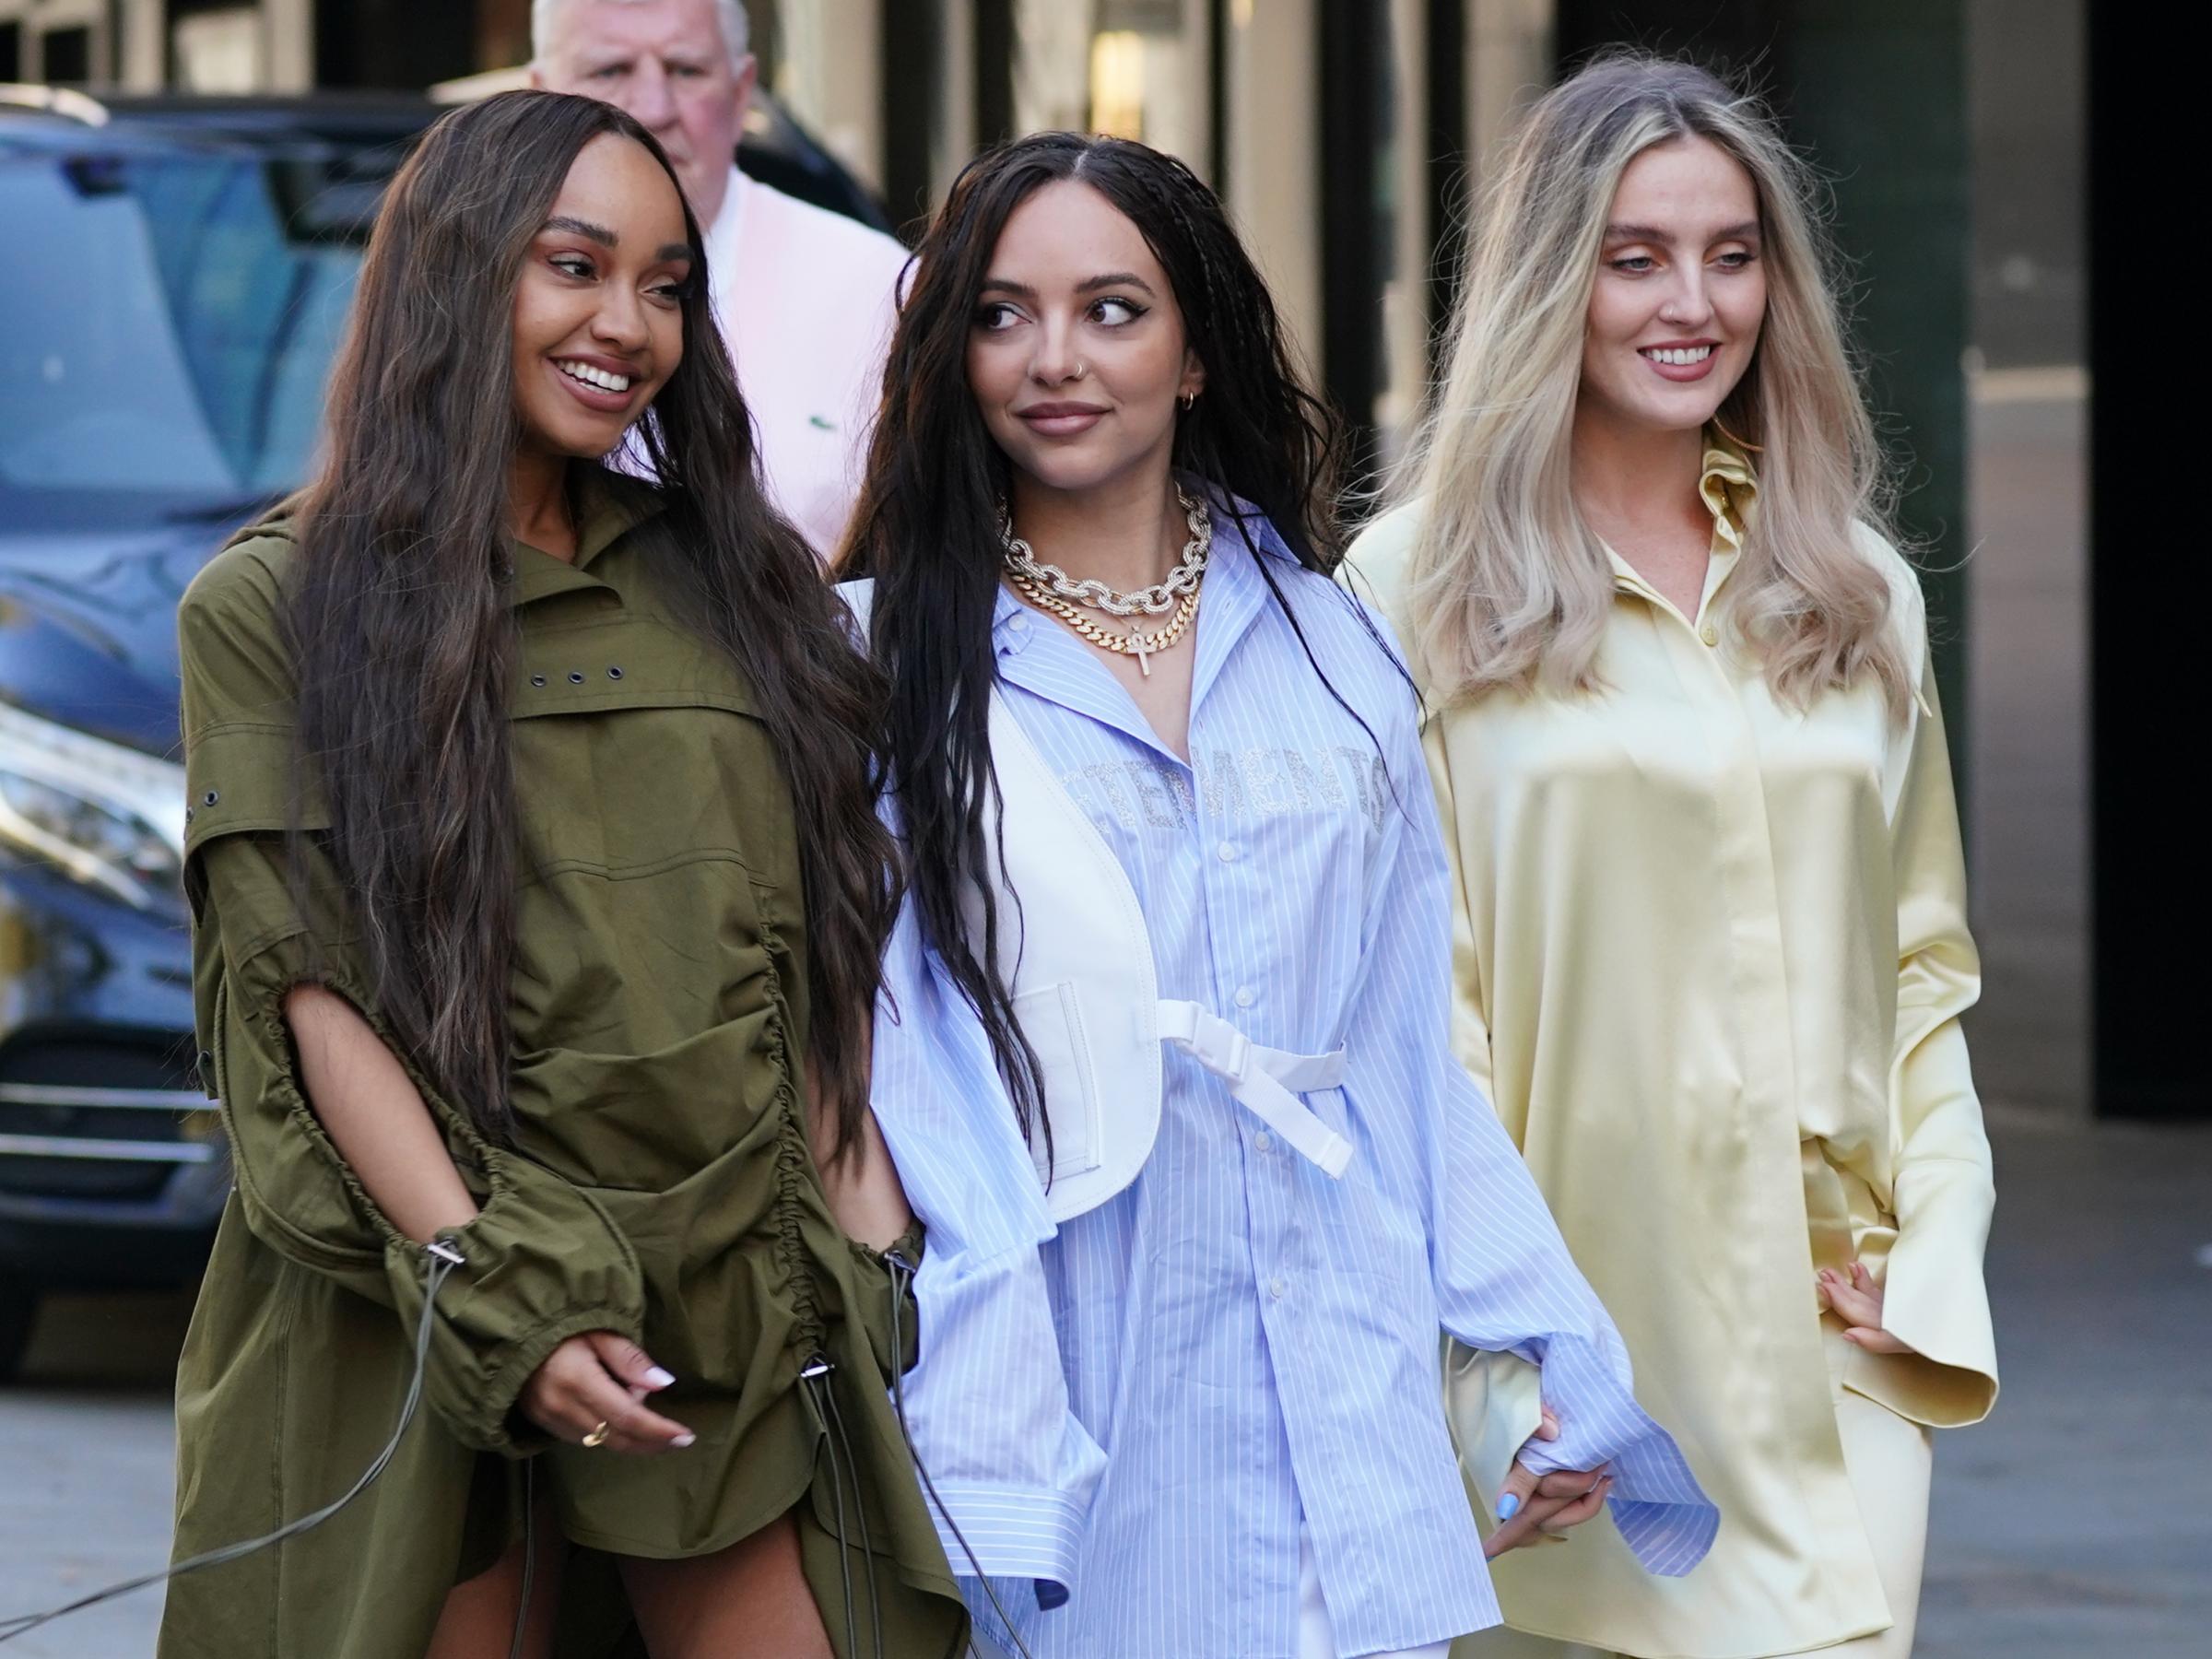 The members of Little Mix, (left to right) Leigh-Anne Pinnock, Jade Thirlwall and Perrie Edwards (Photo: PA)